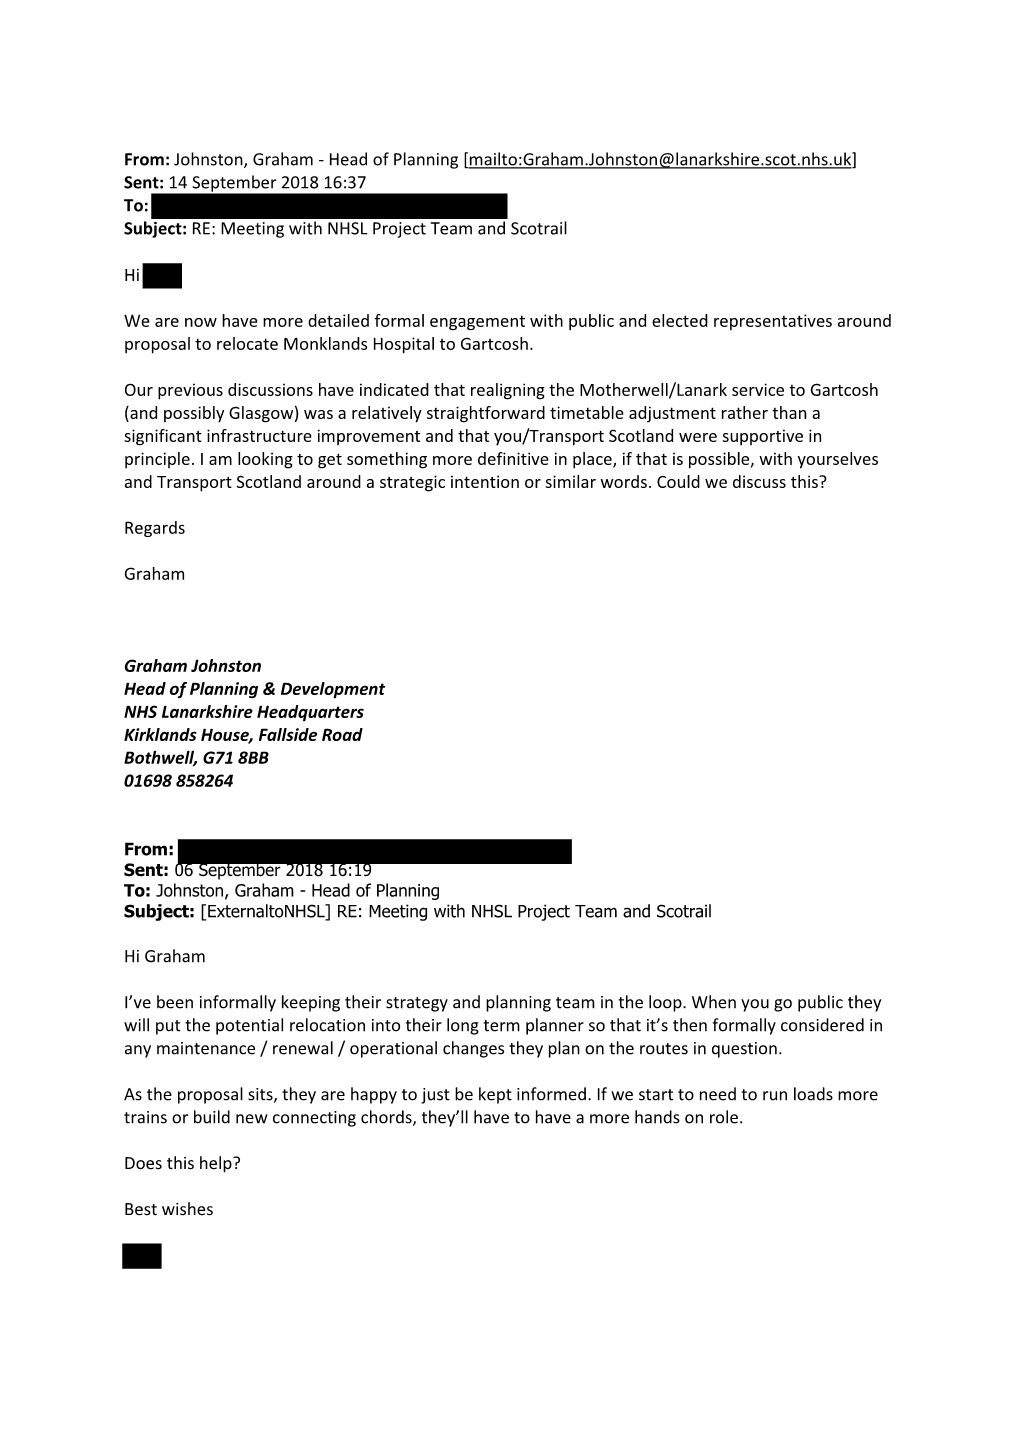 Head of Planning [Mailto:Graham.Johnston@Lanarkshire.Scot.Nhs.Uk] Sent: 14 September 2018 16:37 To: Subject: RE: Meeting with NHSL Project Team and Scotrail